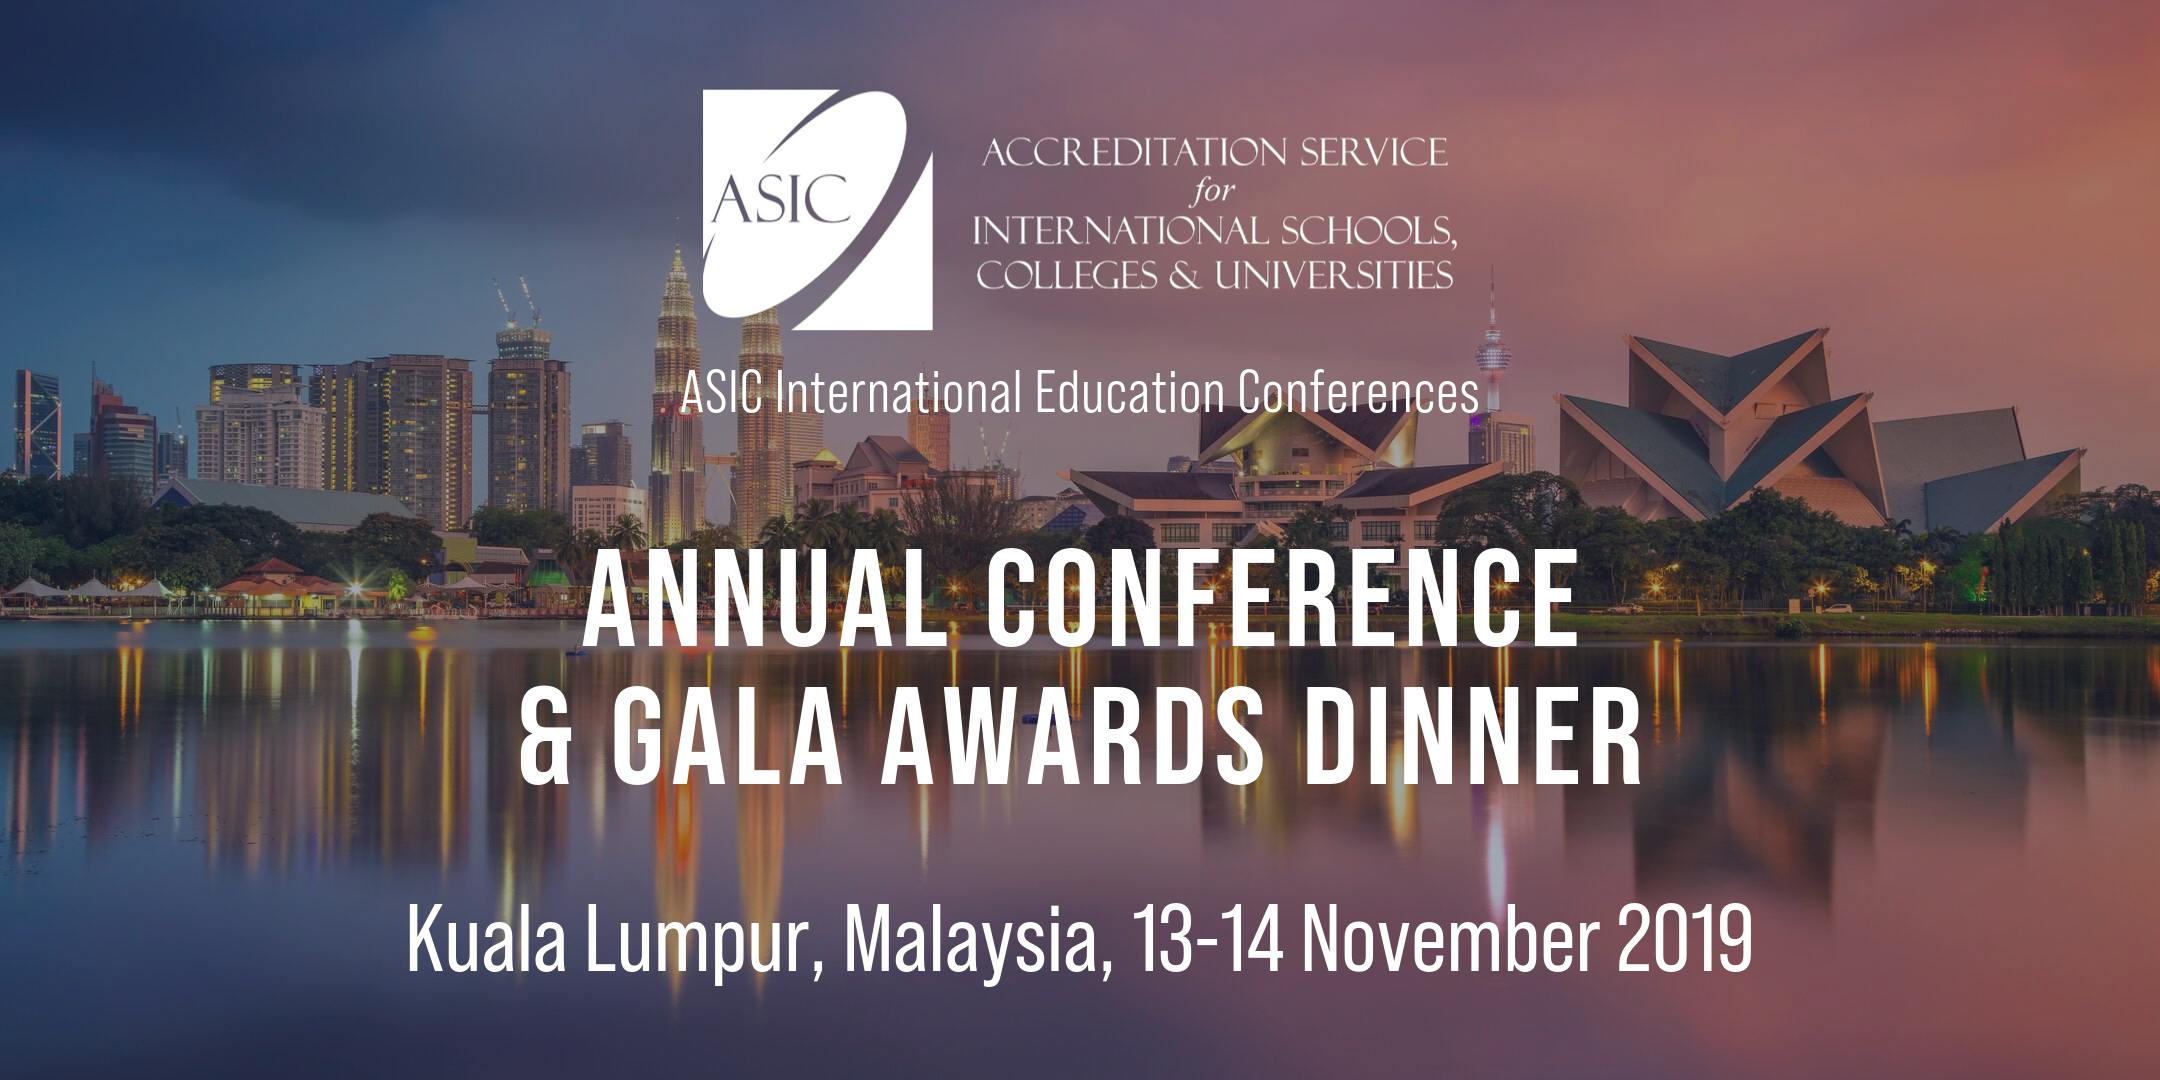 ASIC Annual Conference & Gala Awards Dinner - Malaysia